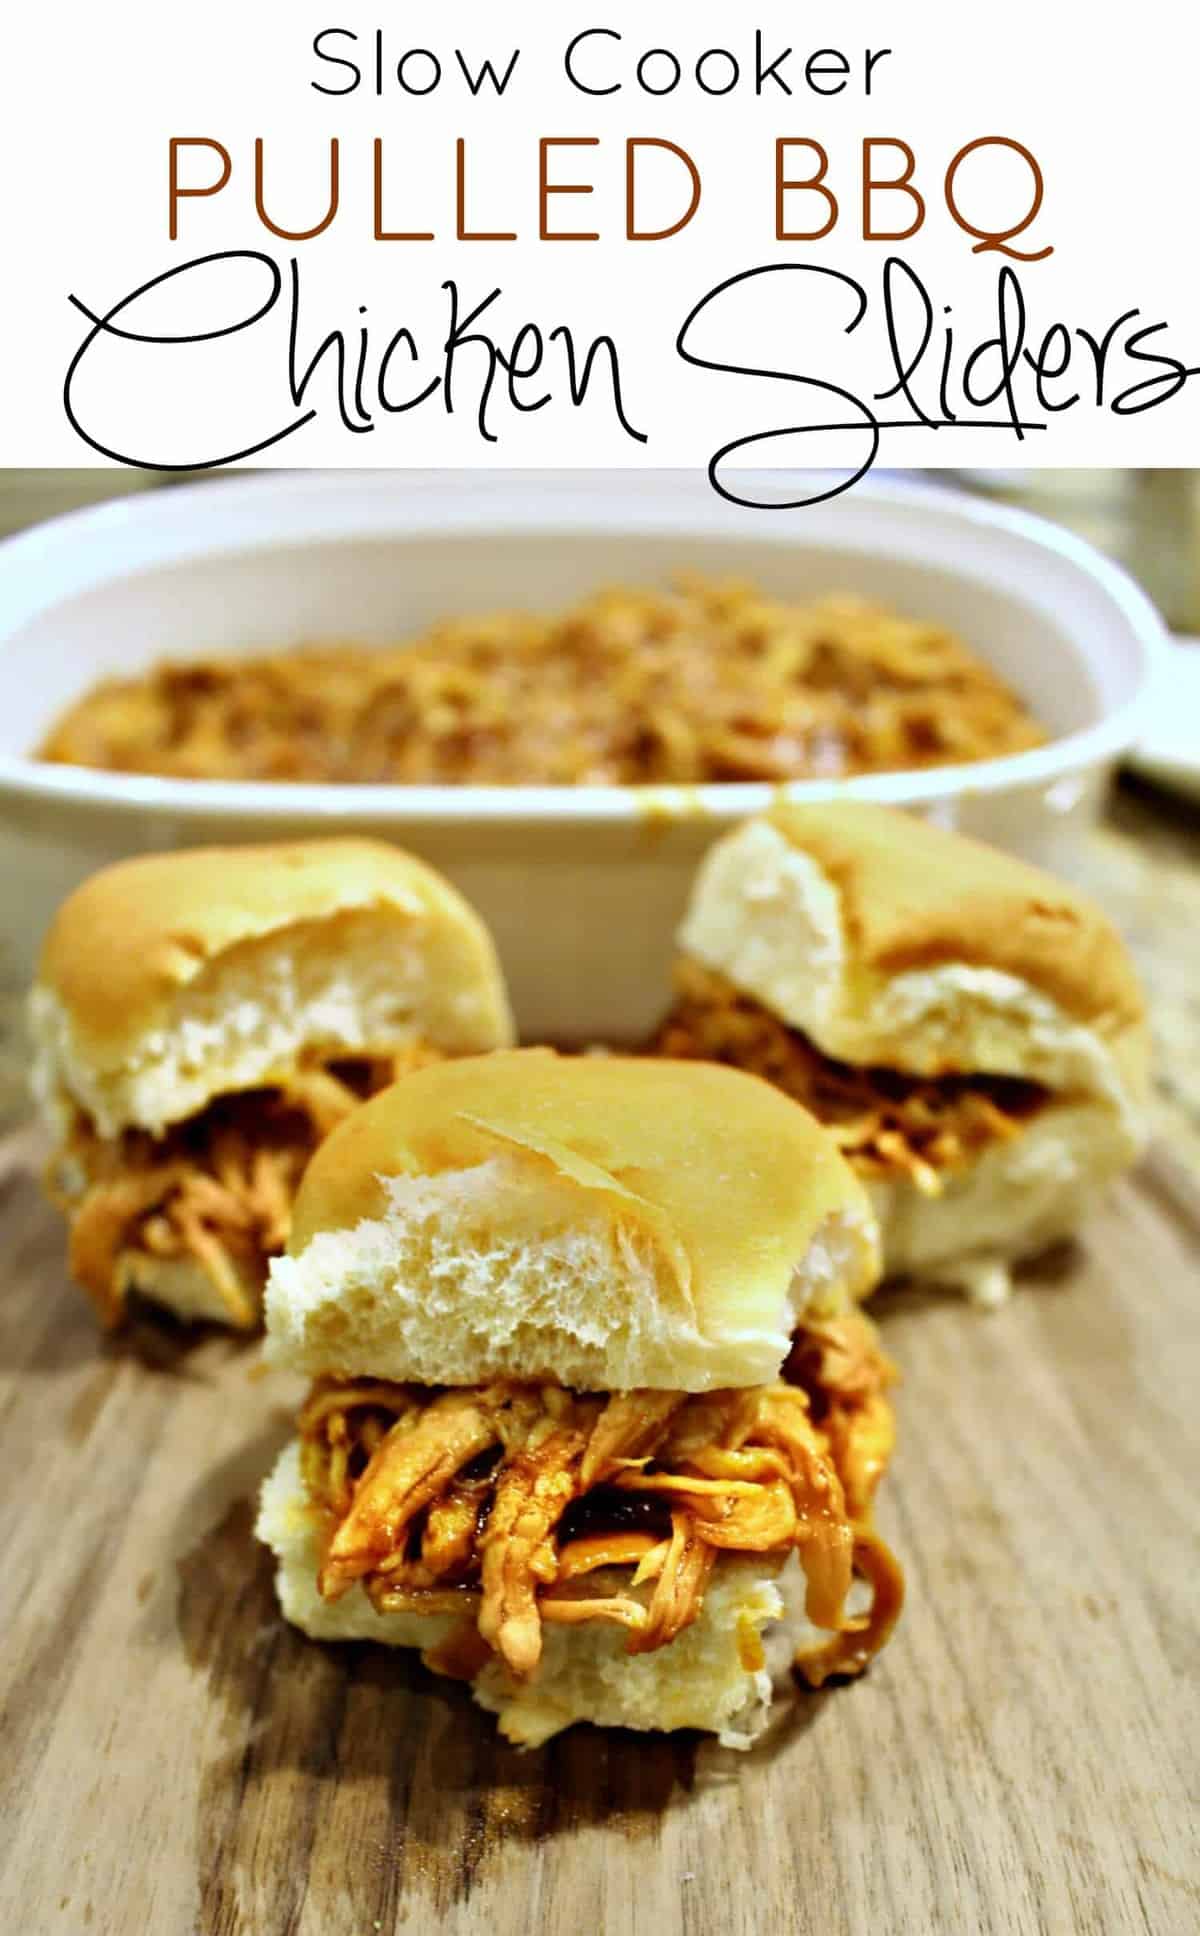 Slow Cooker Pulled BBQ Chicken sliders - Princess Pinky Girl